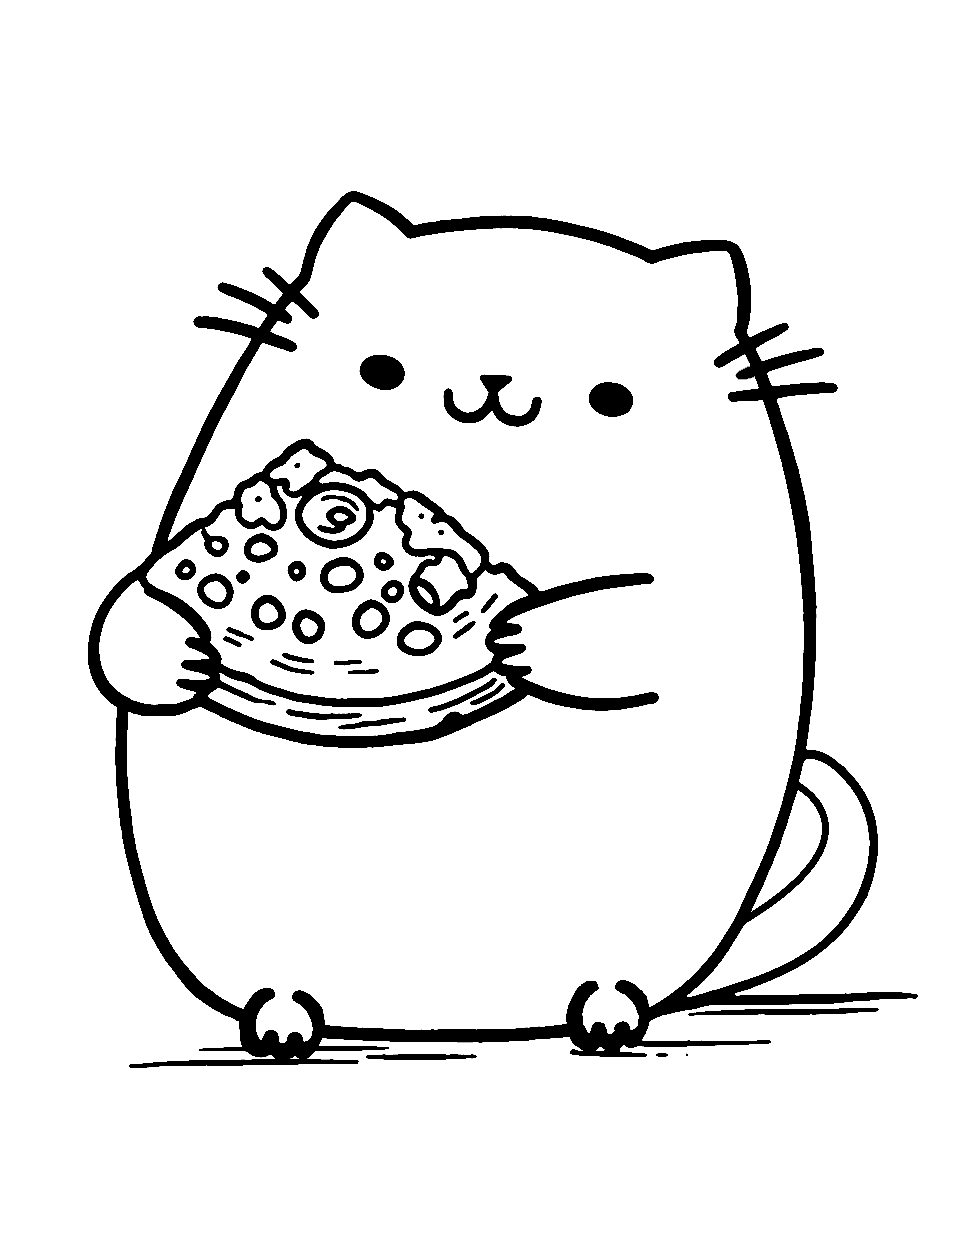 Pusheen's Pizza Day Coloring Page - Pusheen ready to take a big bite out of a cheesy pizza slice.